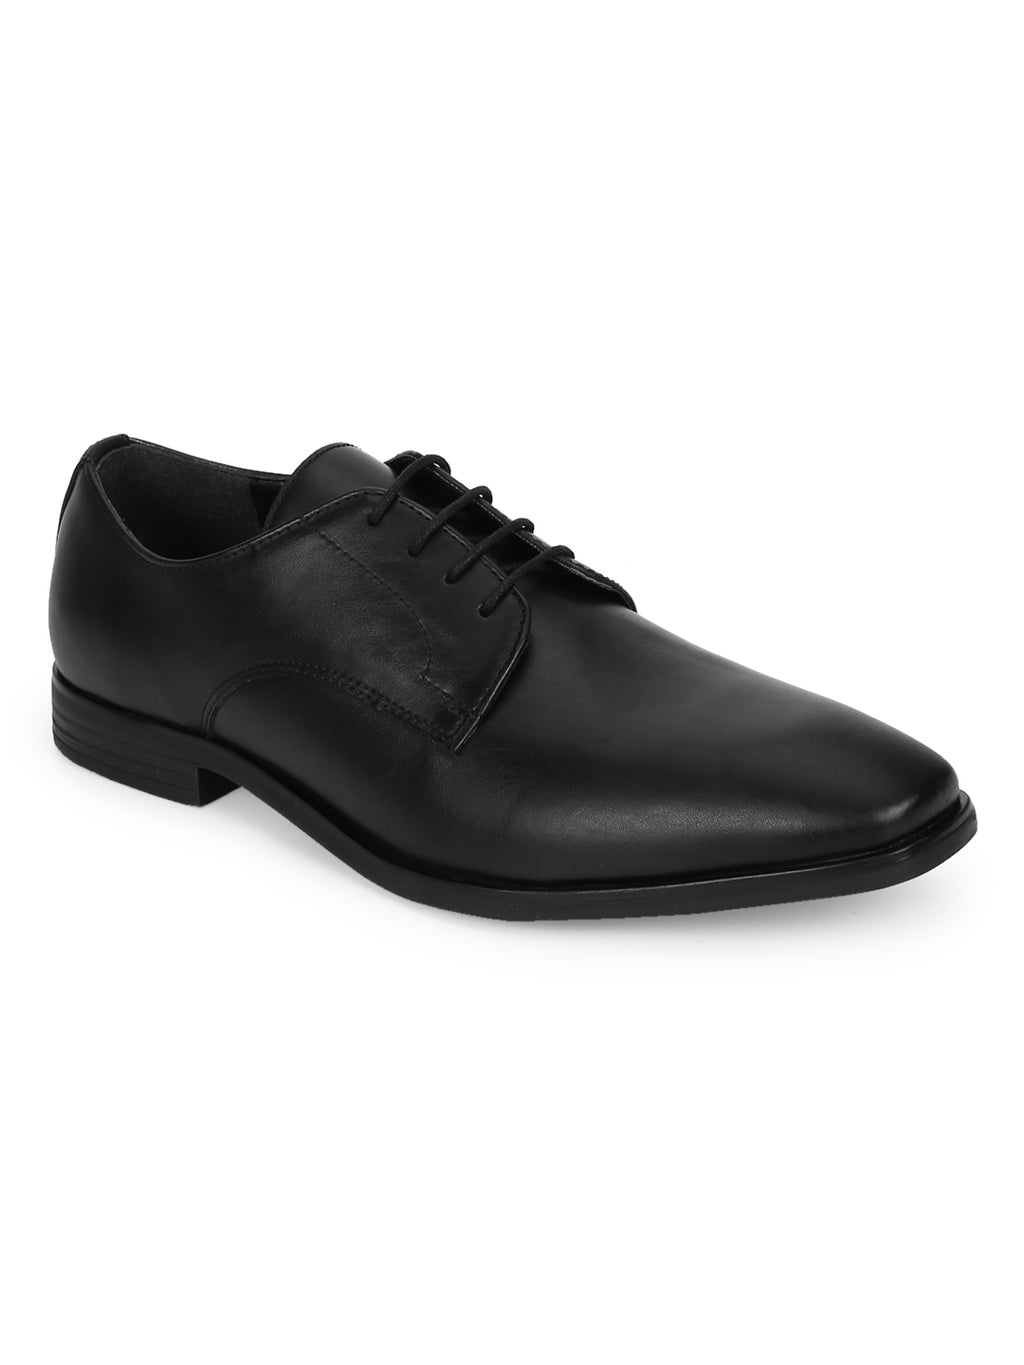 Washable Mens Low Heel Black Leather Formal Shoes at Best Price in Ranipet  | M F Shoes